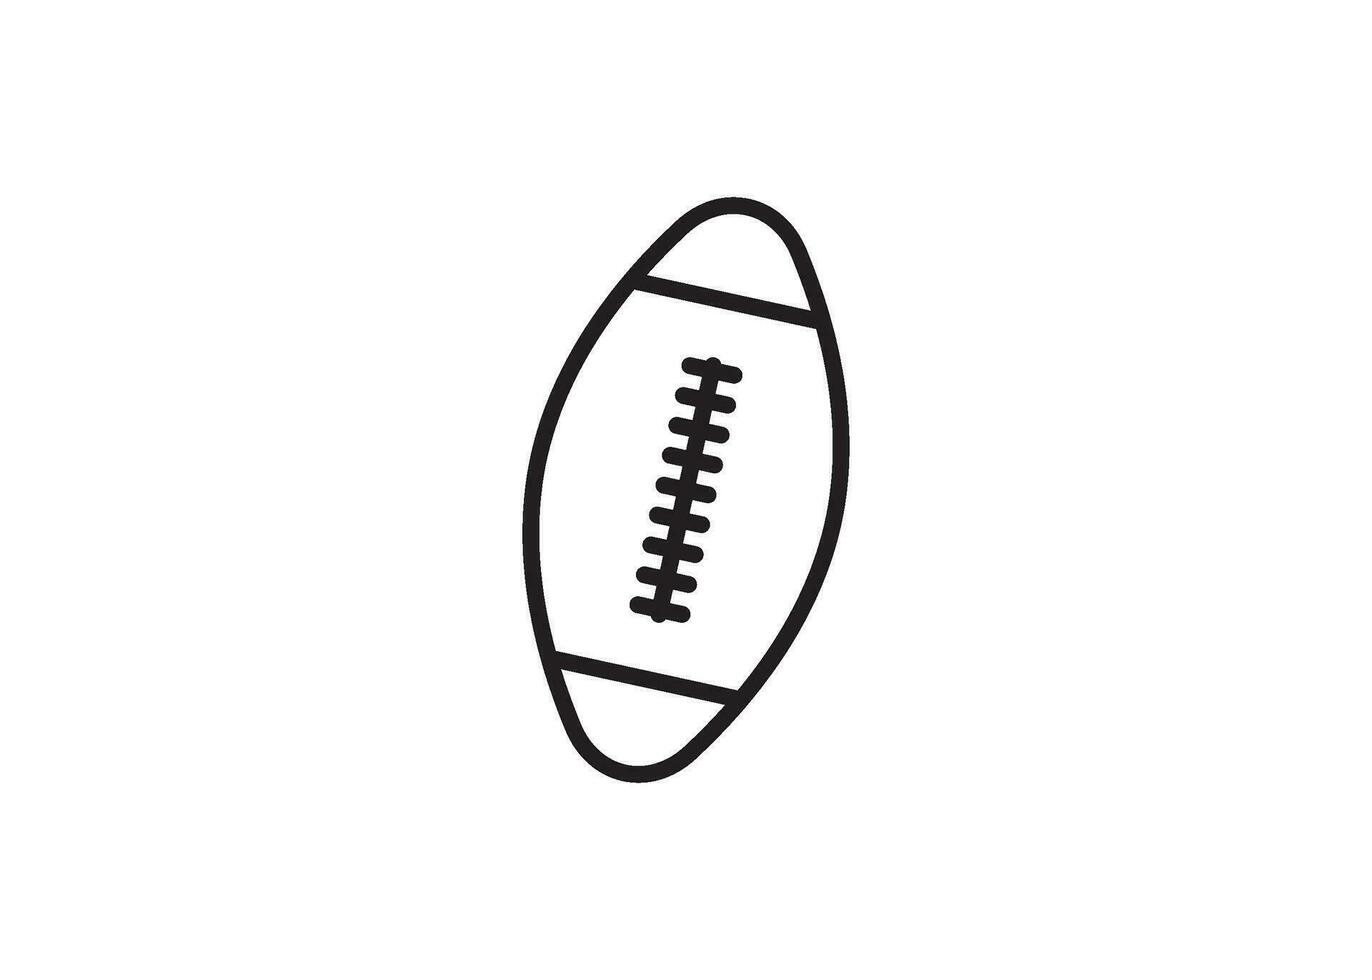 rugby ball icon design vector